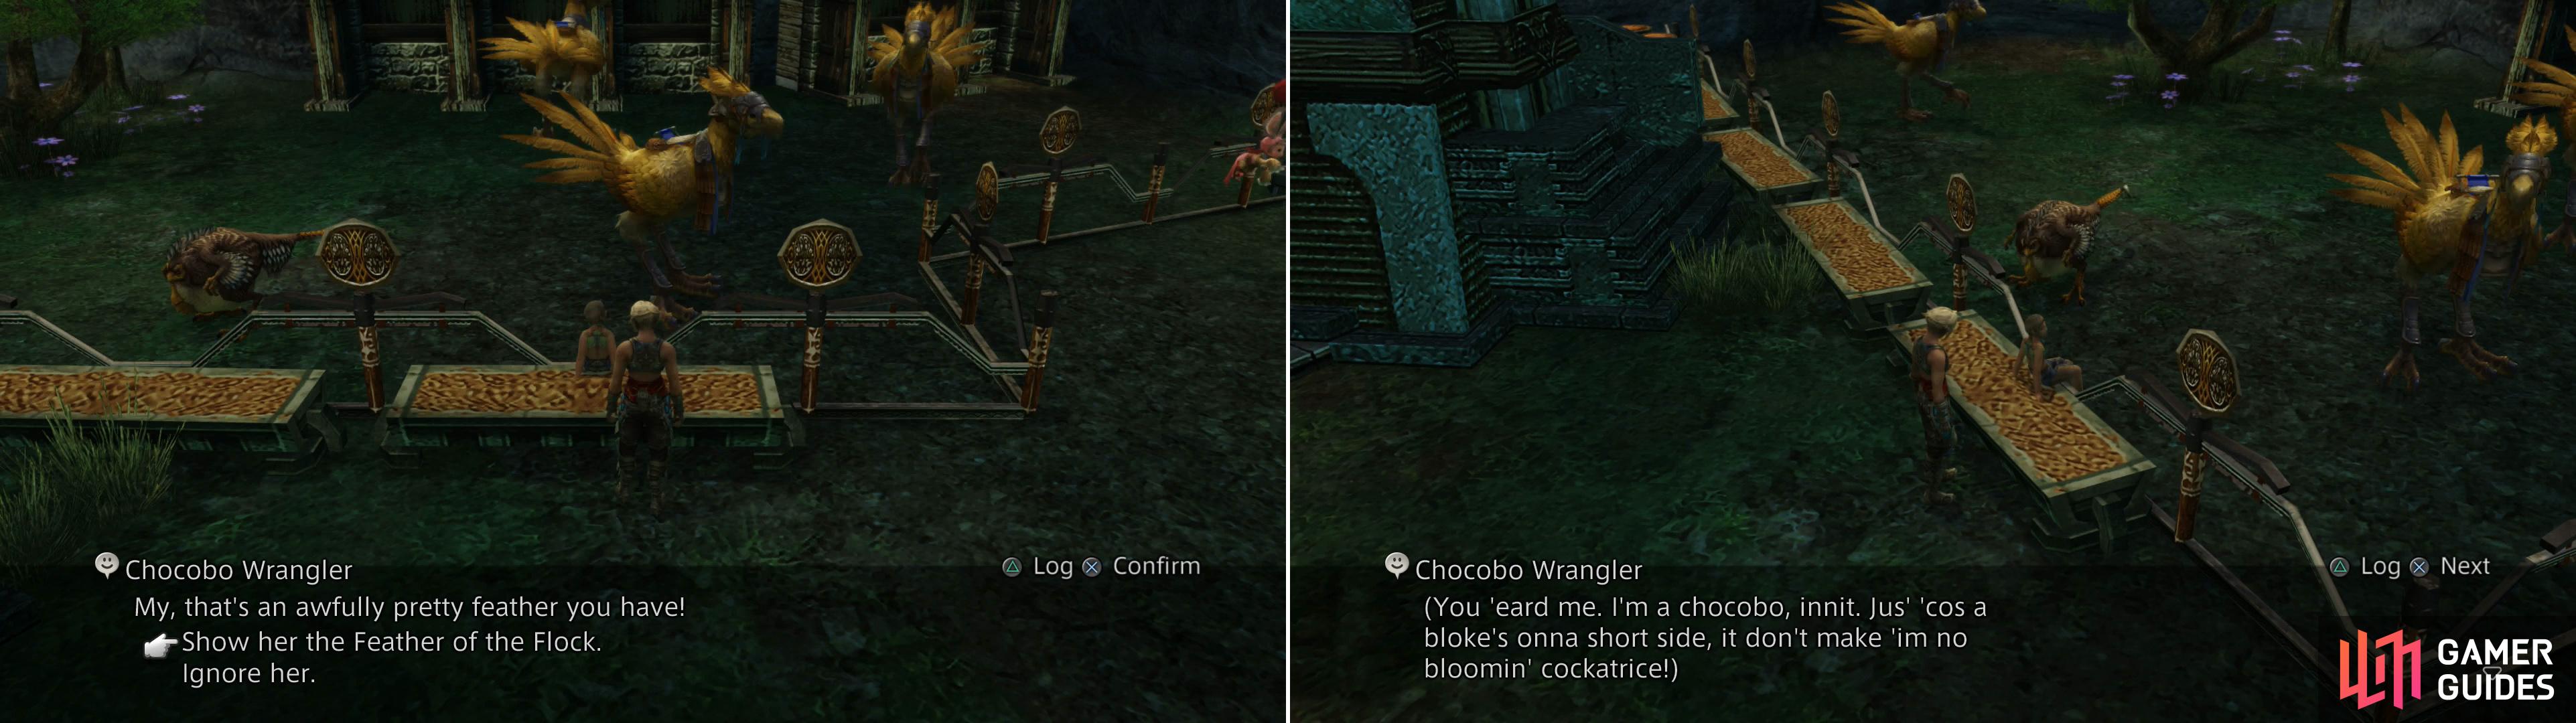 Show the Chocobo Wrangler the Feather of the Flock (left) after which you'll overhear a rather odd "Chocobo" (right).